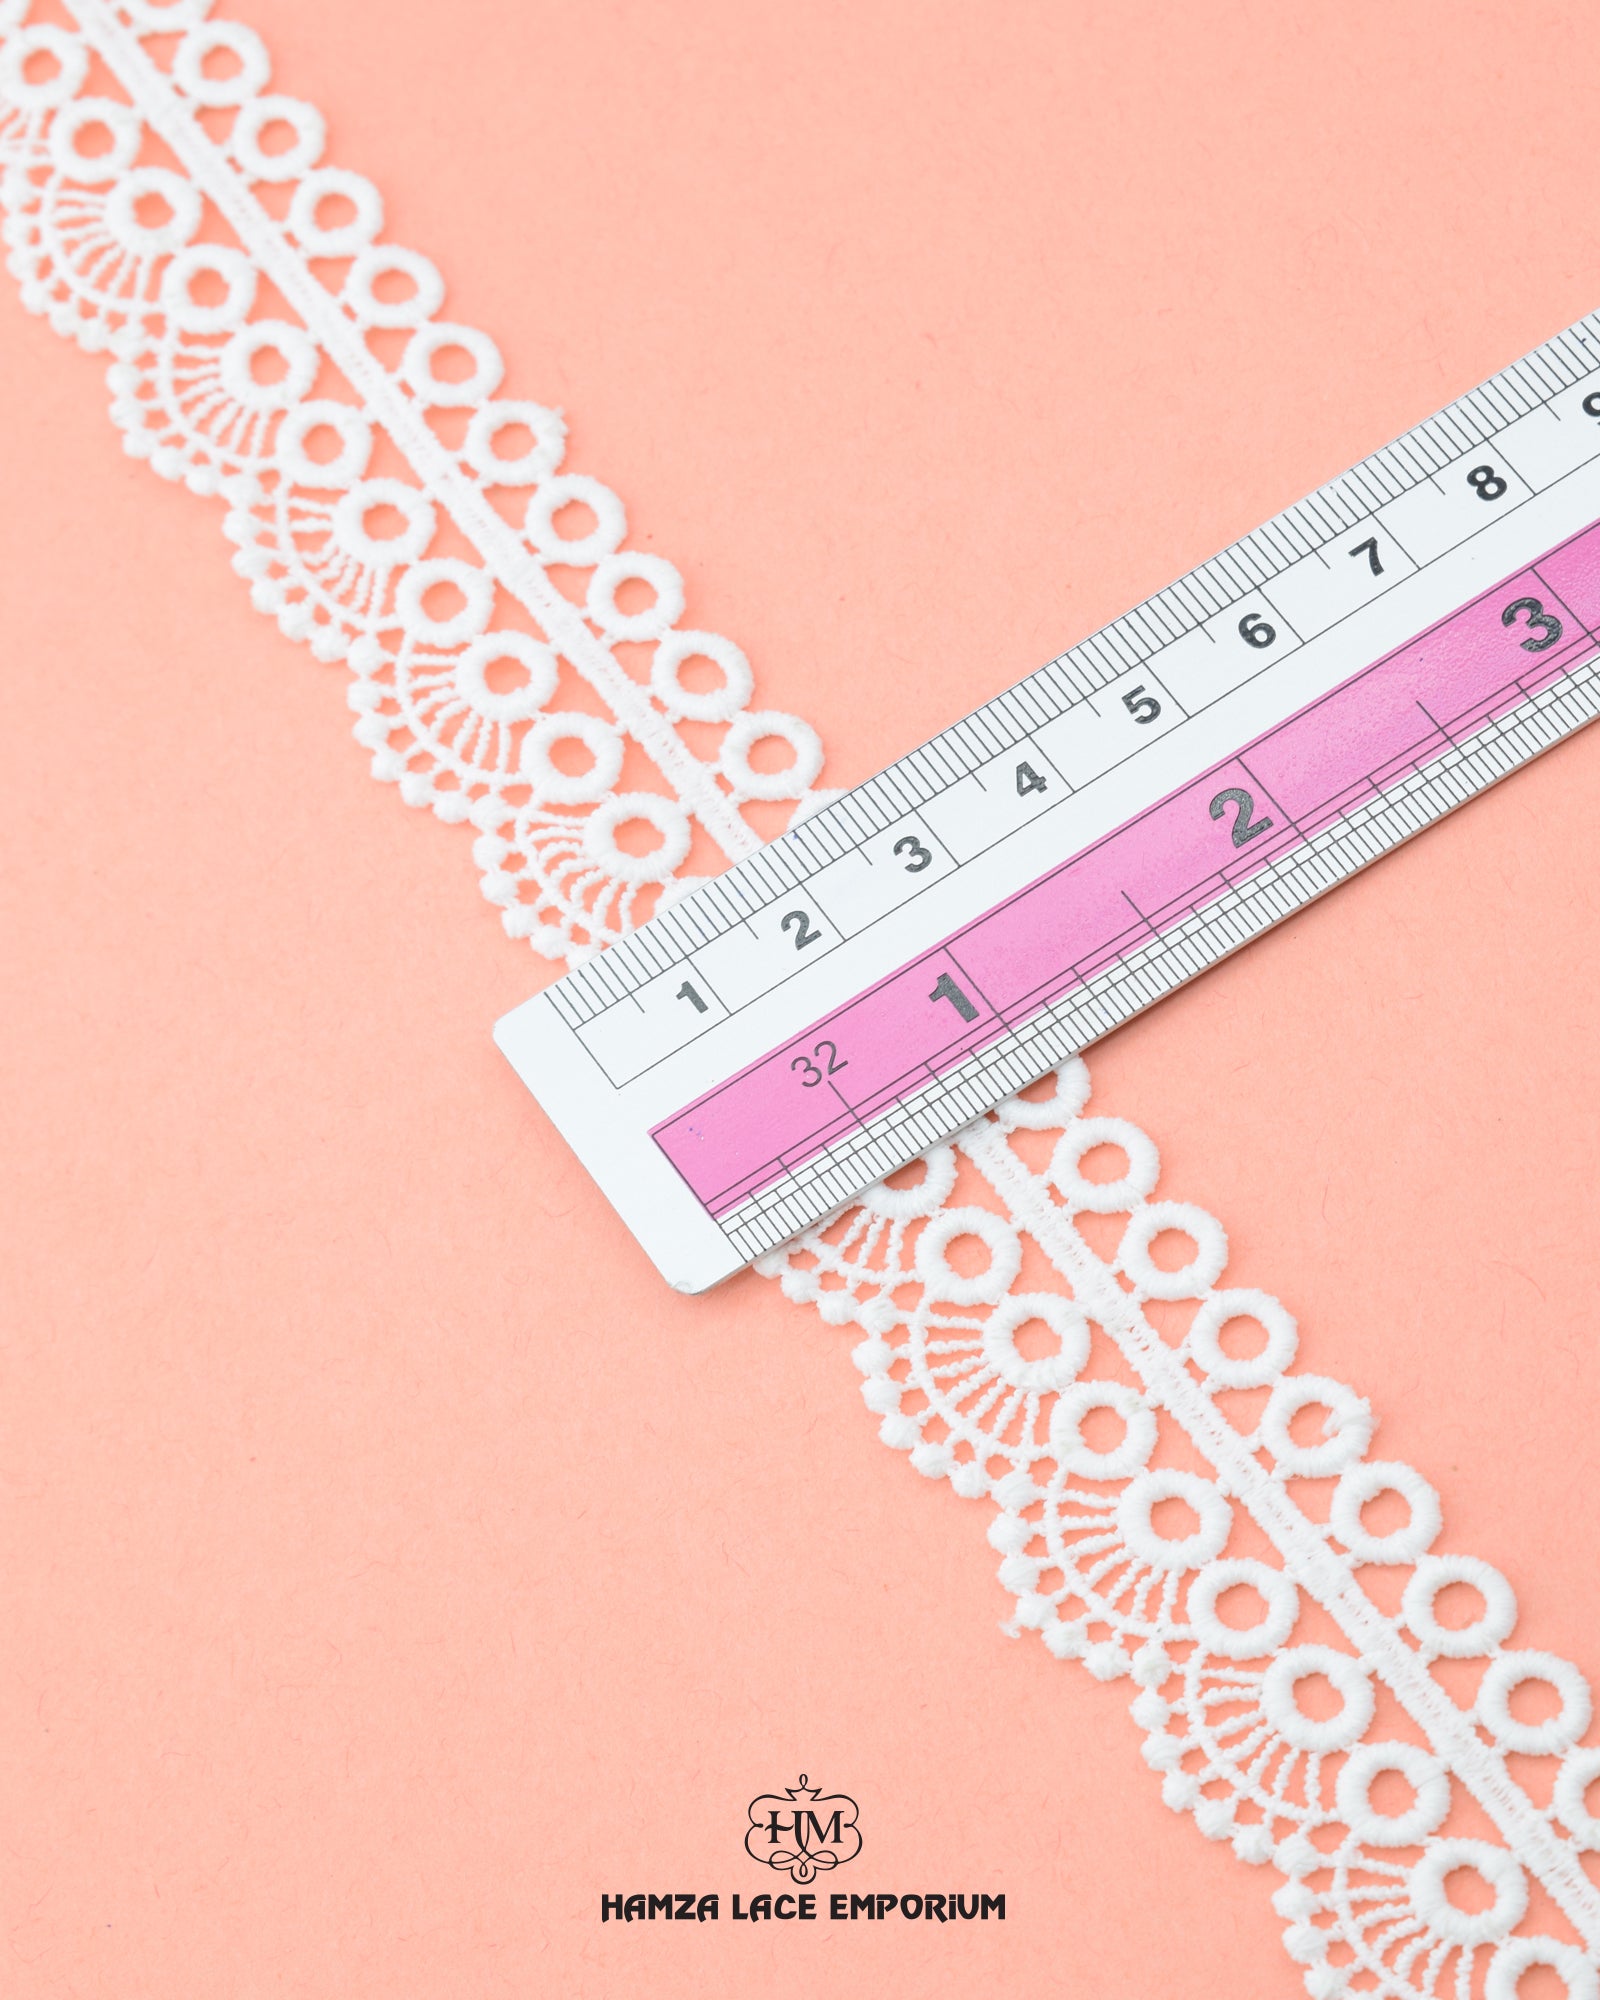 Size of the 'Edging Lace 7096' is shown as '0.5' inches with the help of a ruler